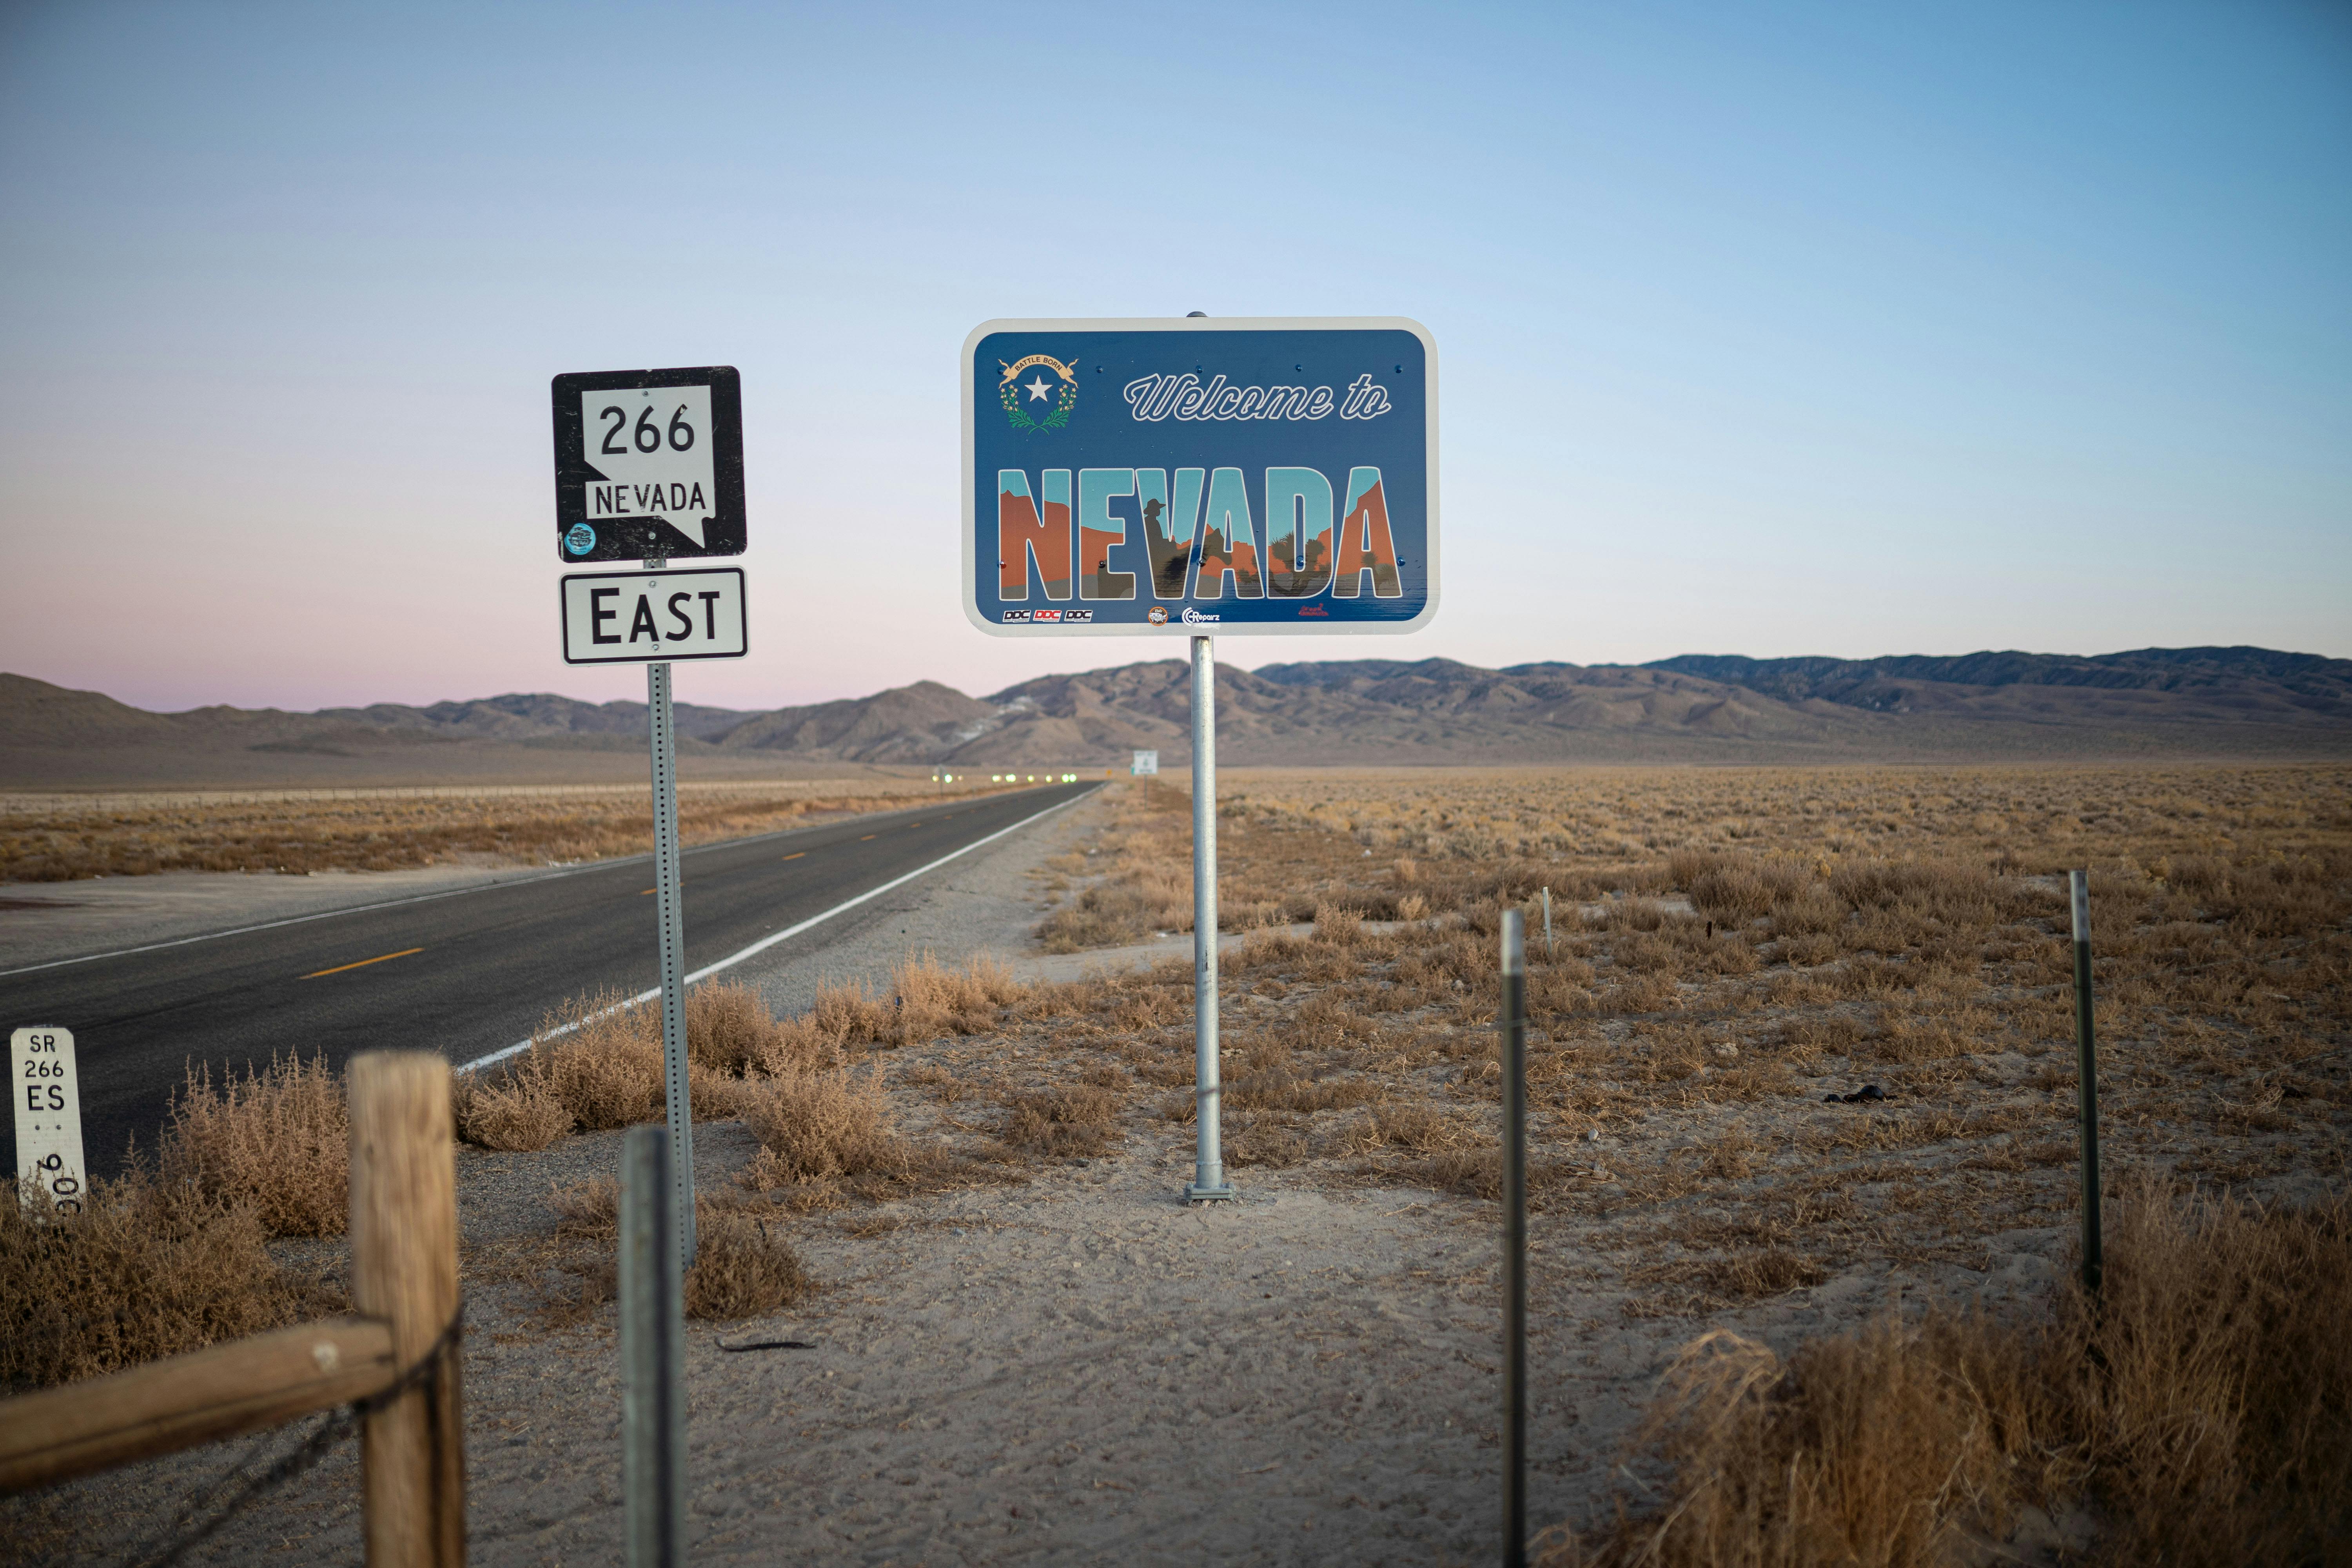 LLC Wyoming vs Nevada: Choosing the Right Business Structure